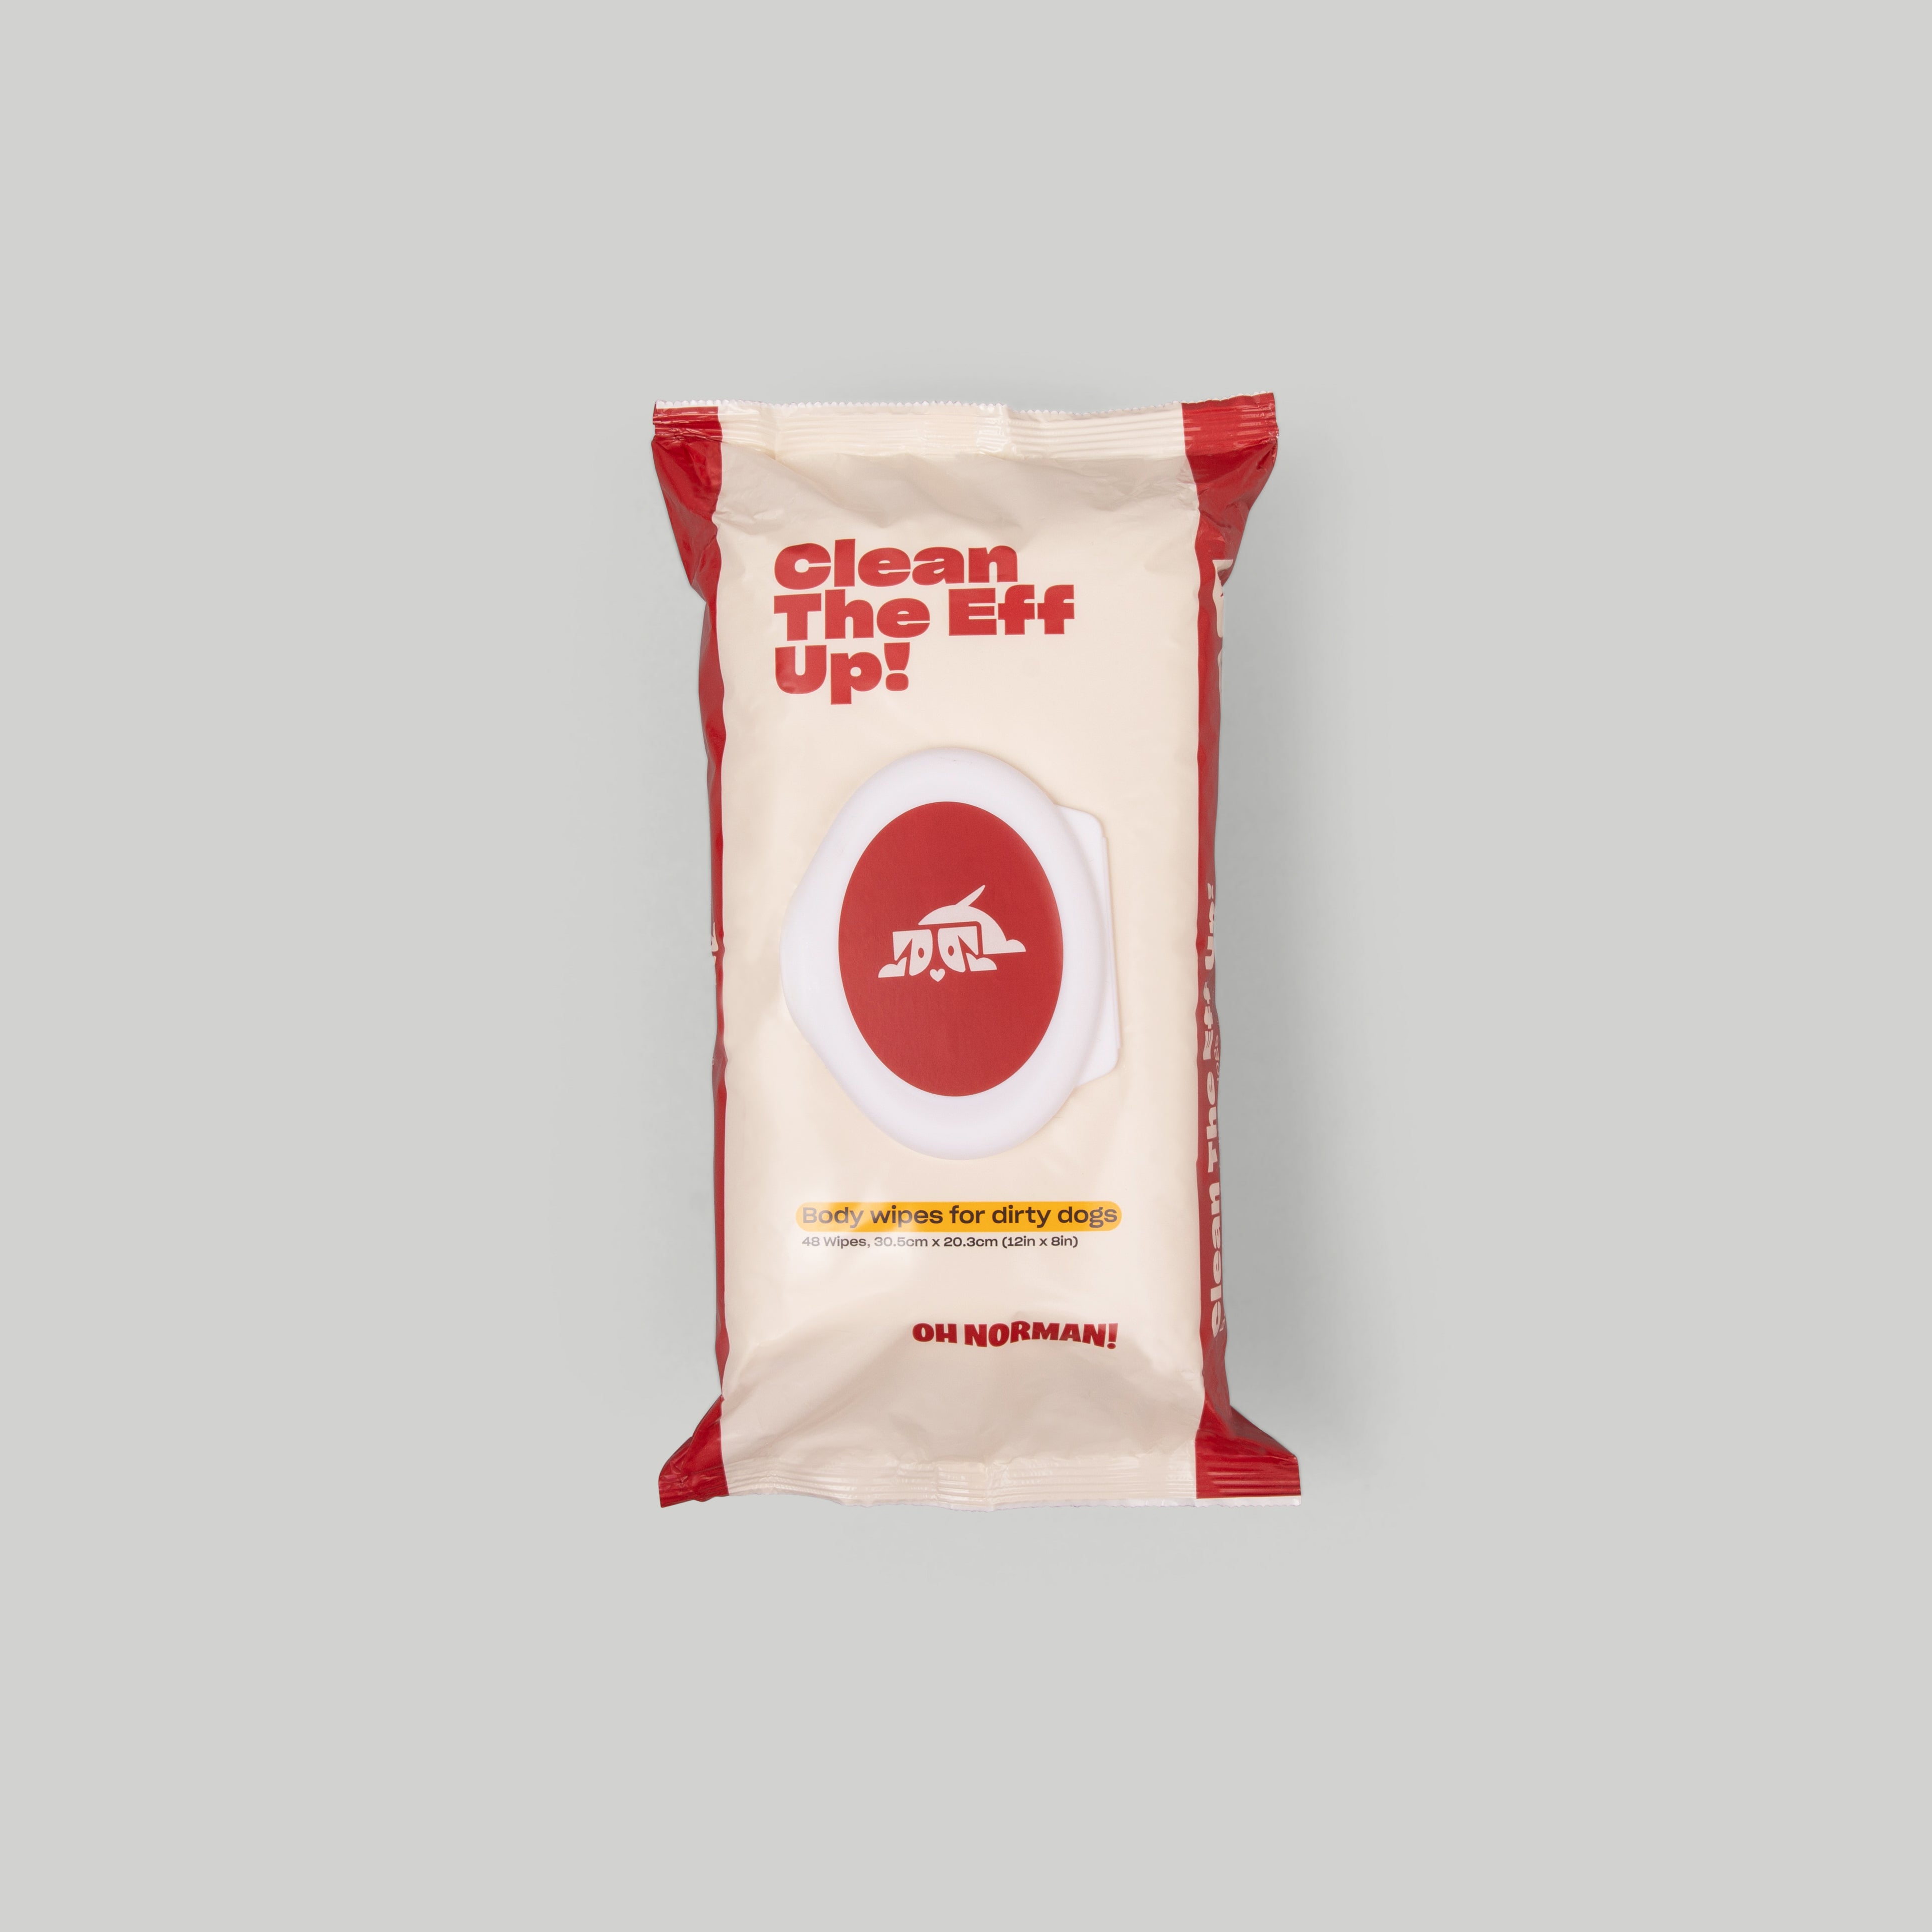 Clean The Eff Up! Body Wipes For Dirty Dogs Bundle